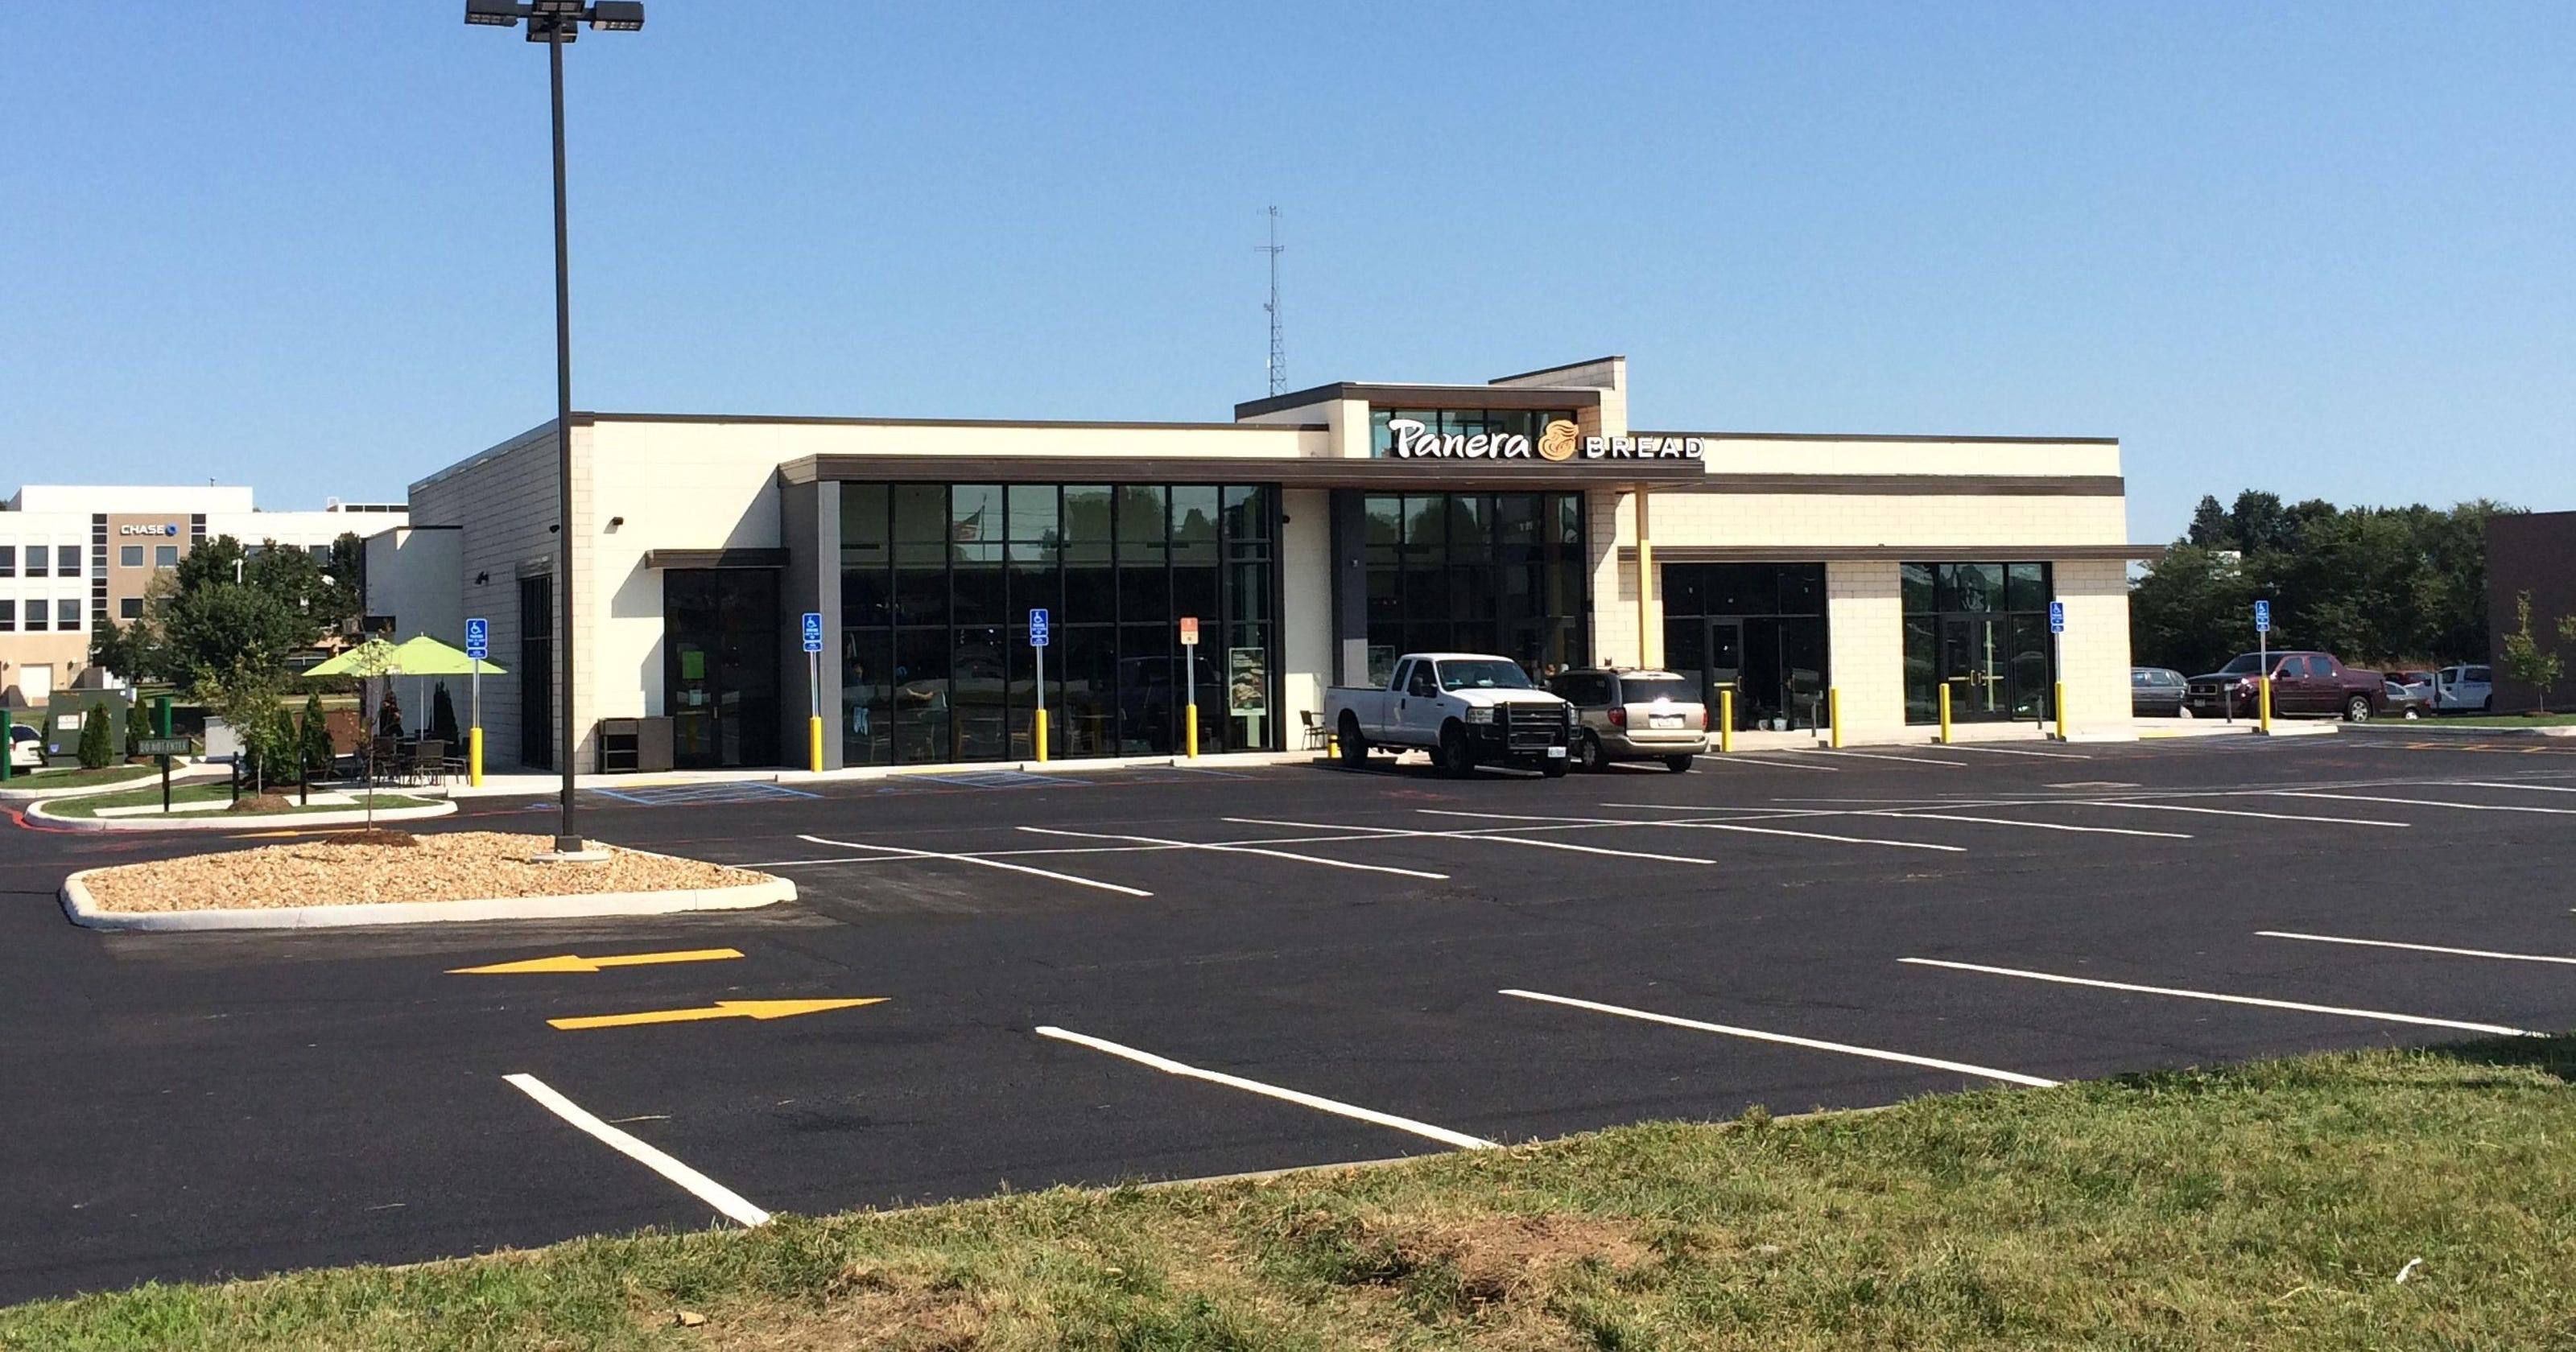 Is Panera Bread Open On Thanksgiving Day
 New Panera Bread to open Wednesday